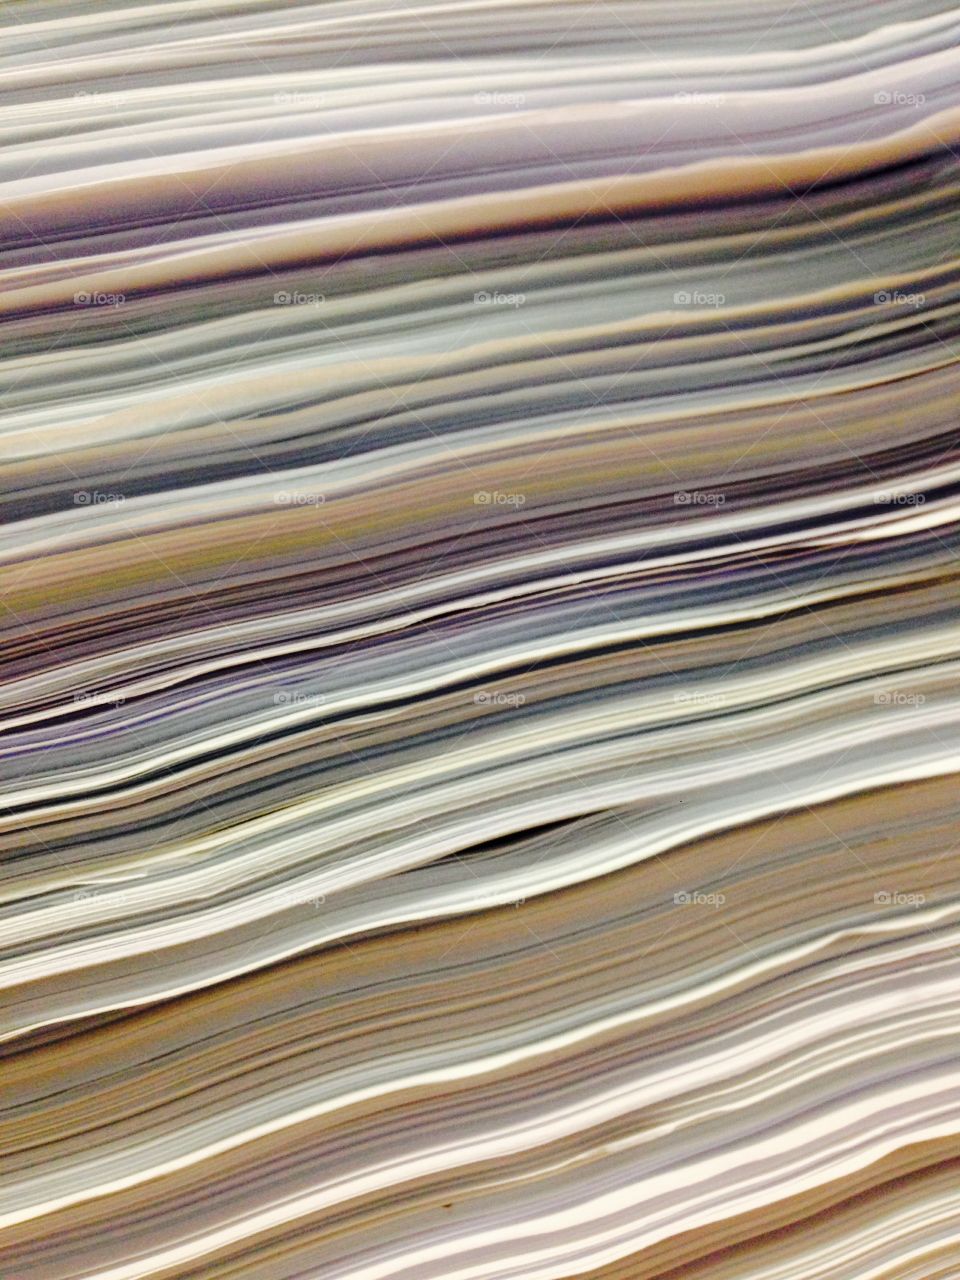 Paper. Documents 